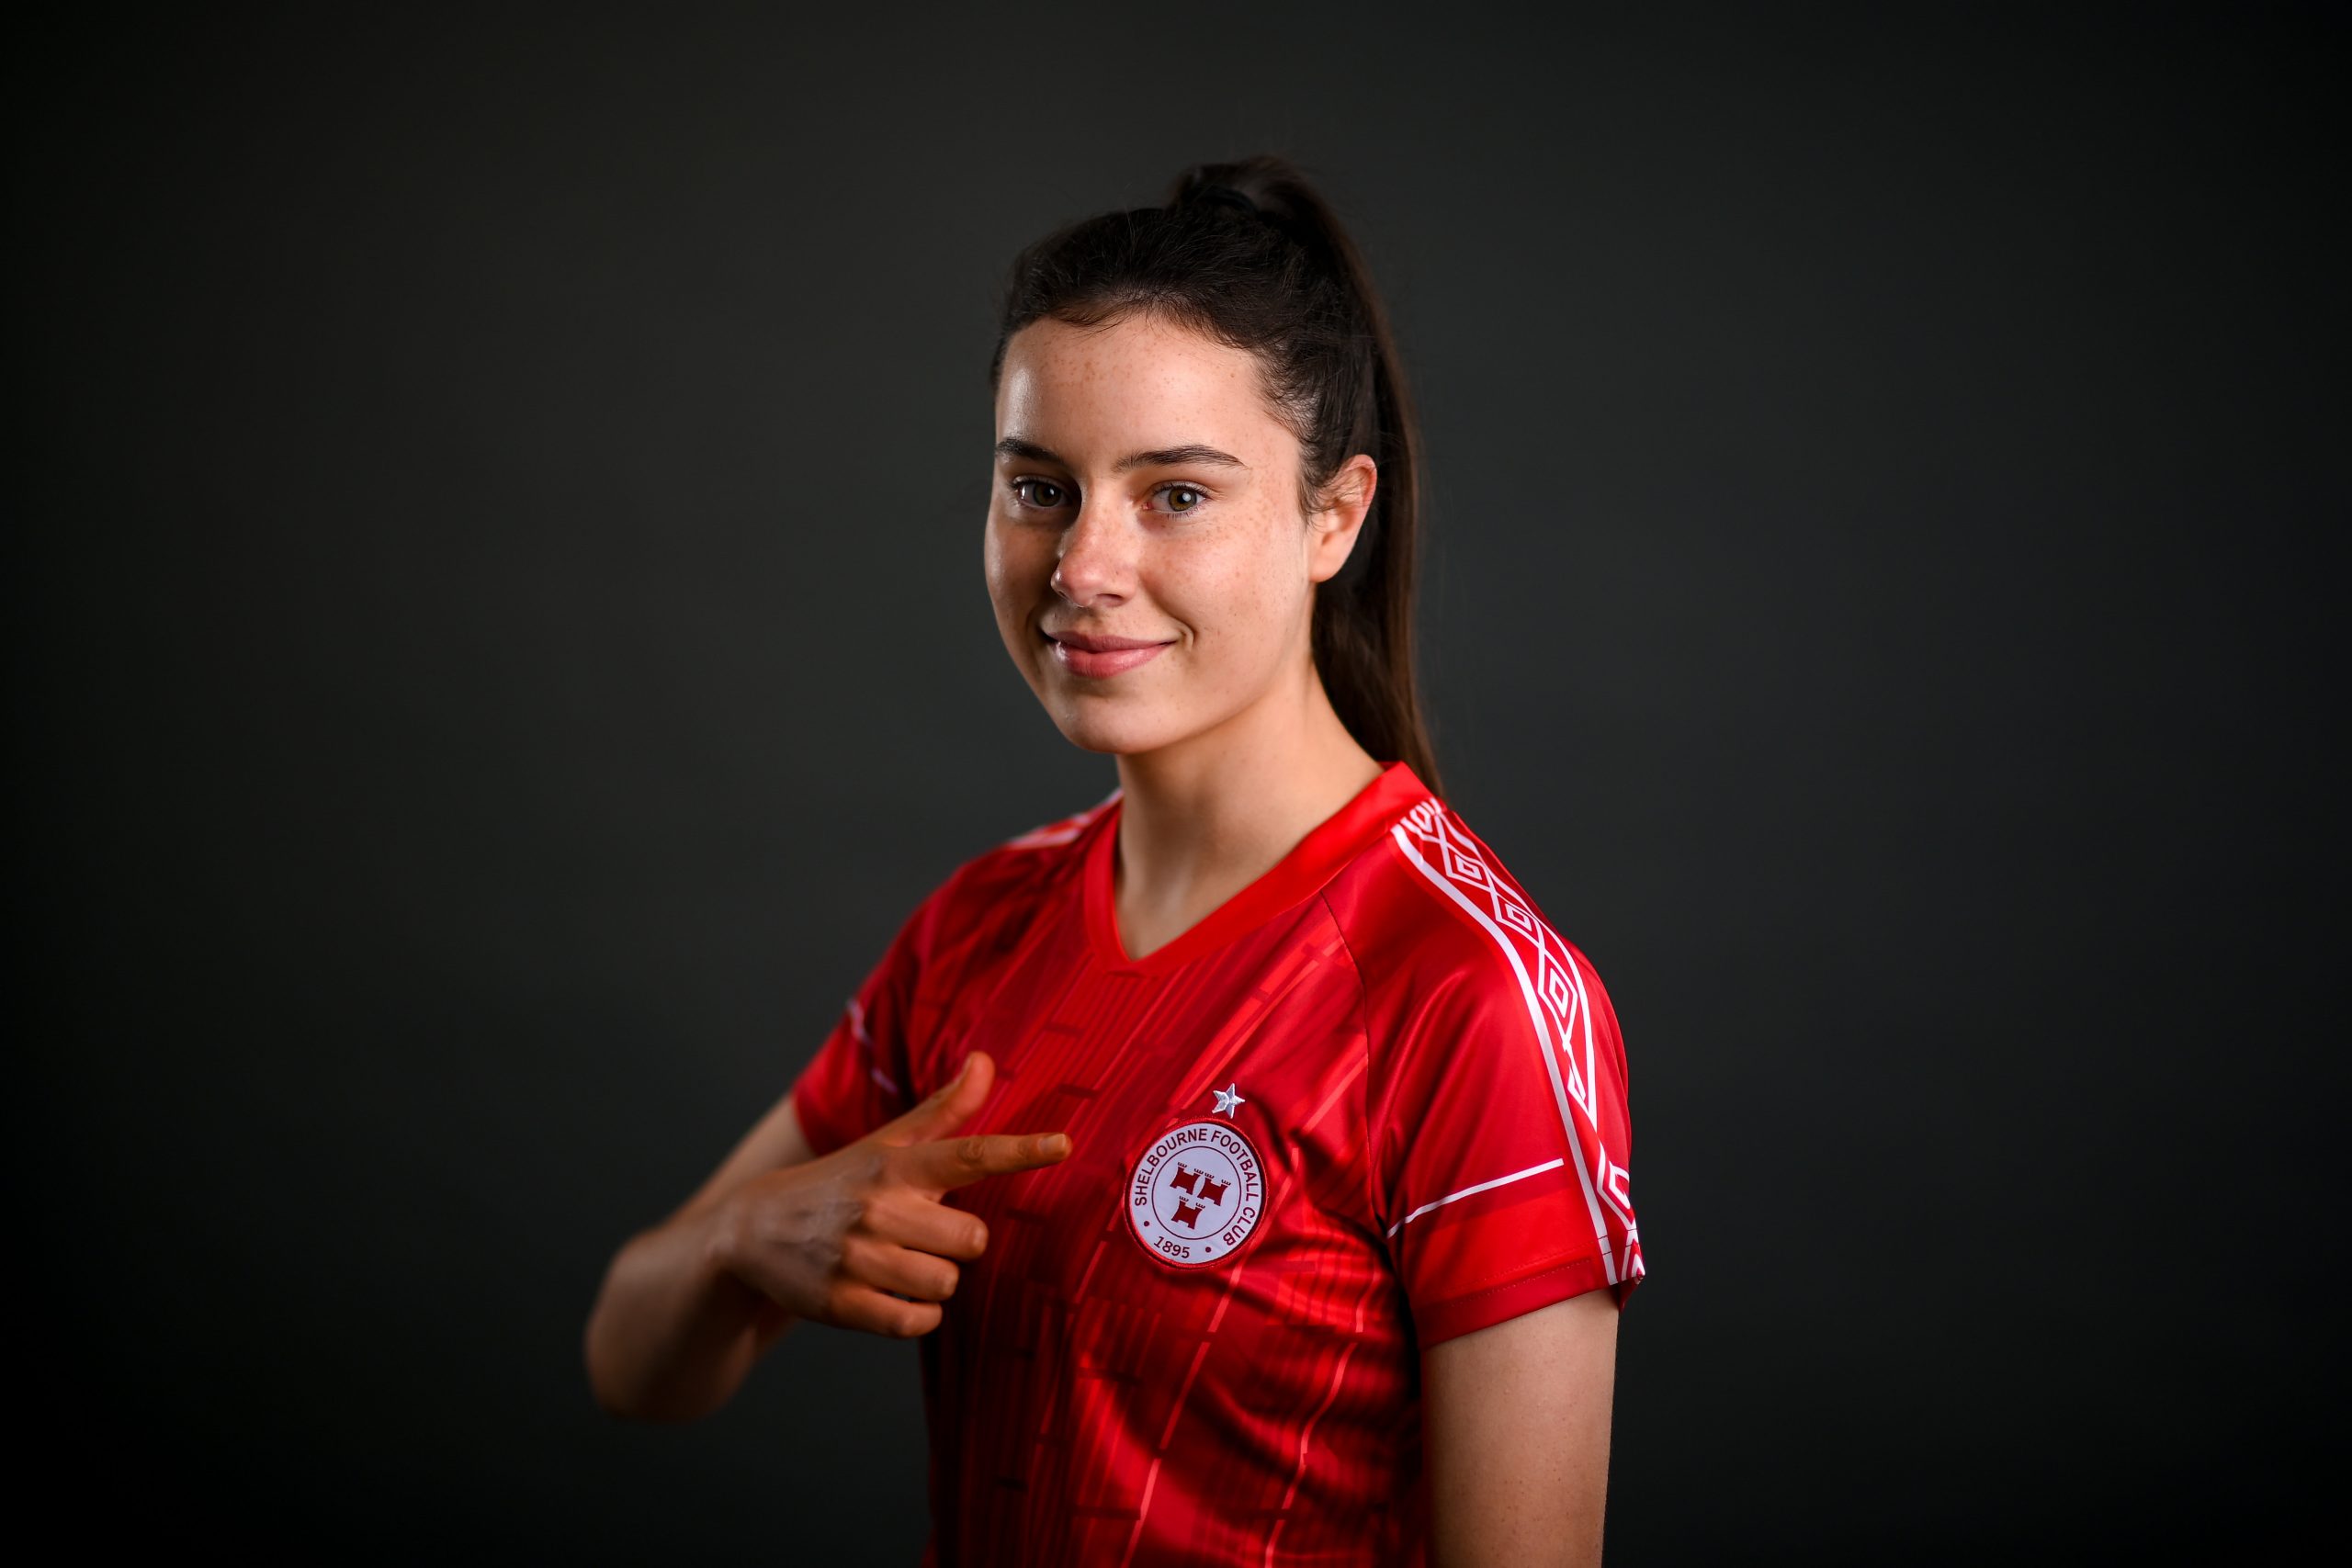 Shelbourne signs Aoife Kelly